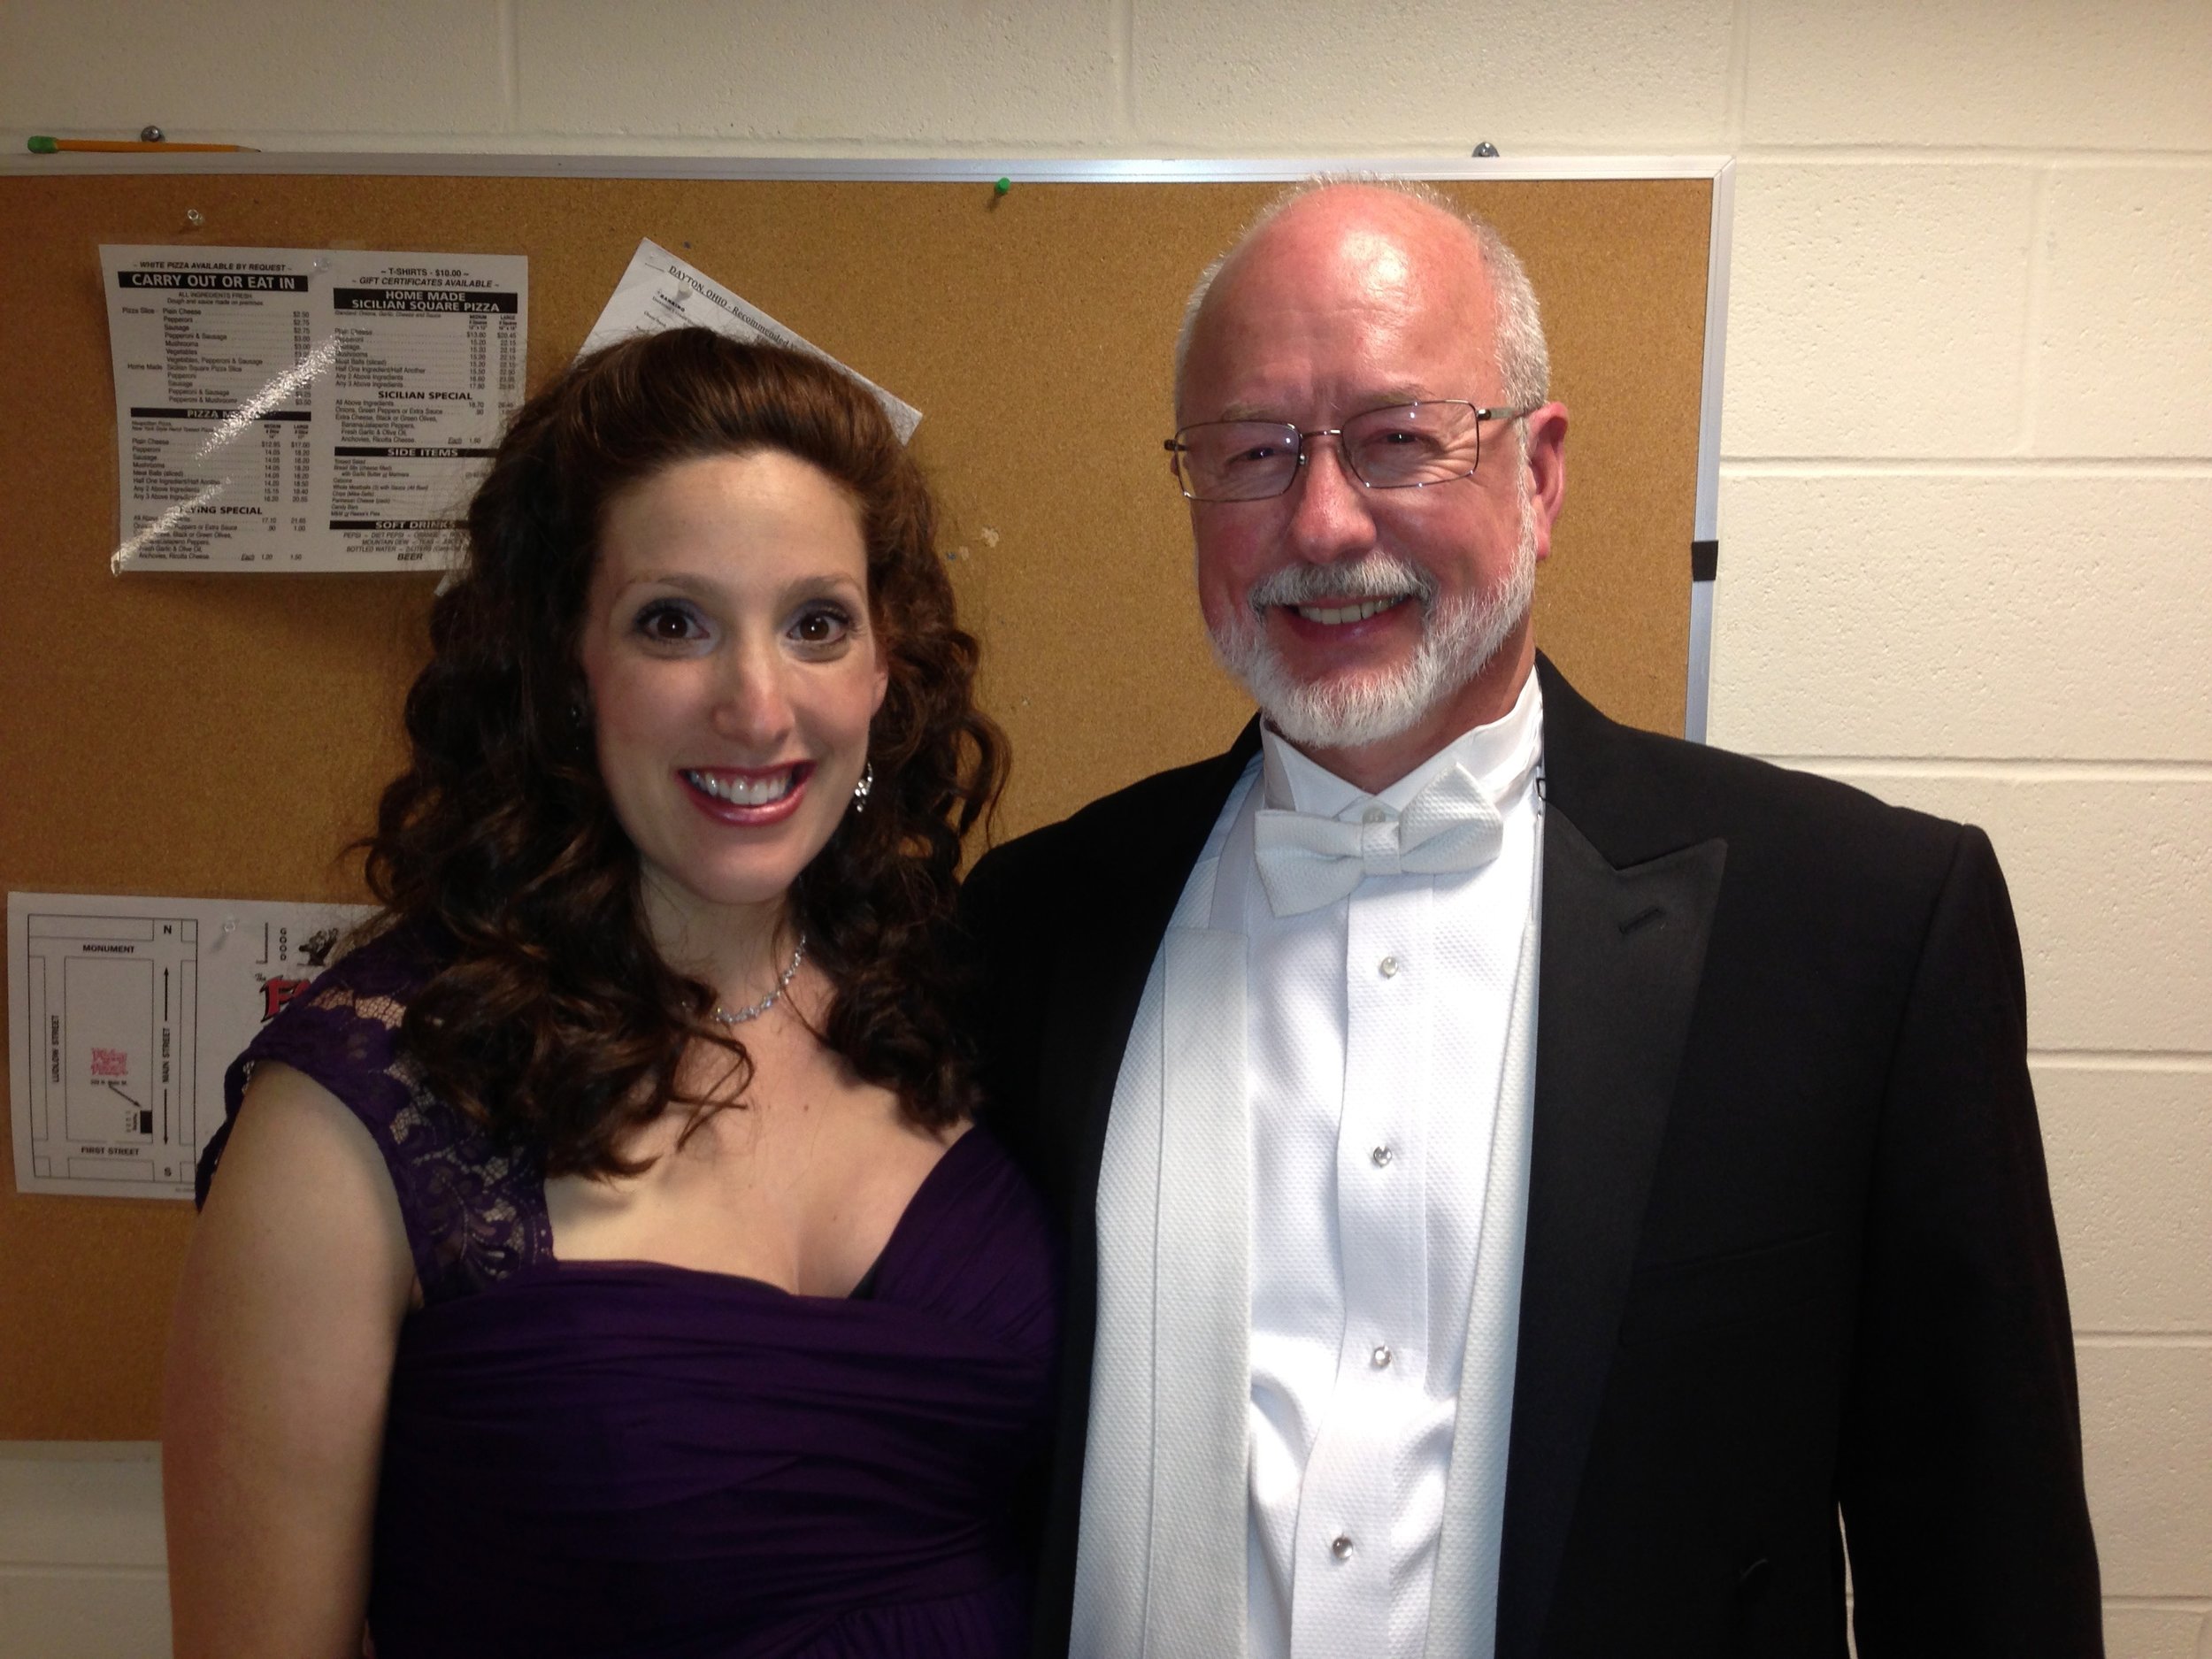  with former teacher and mentor William McGraw, soloists for Brahms Requiem with Dayton Philharmonic 